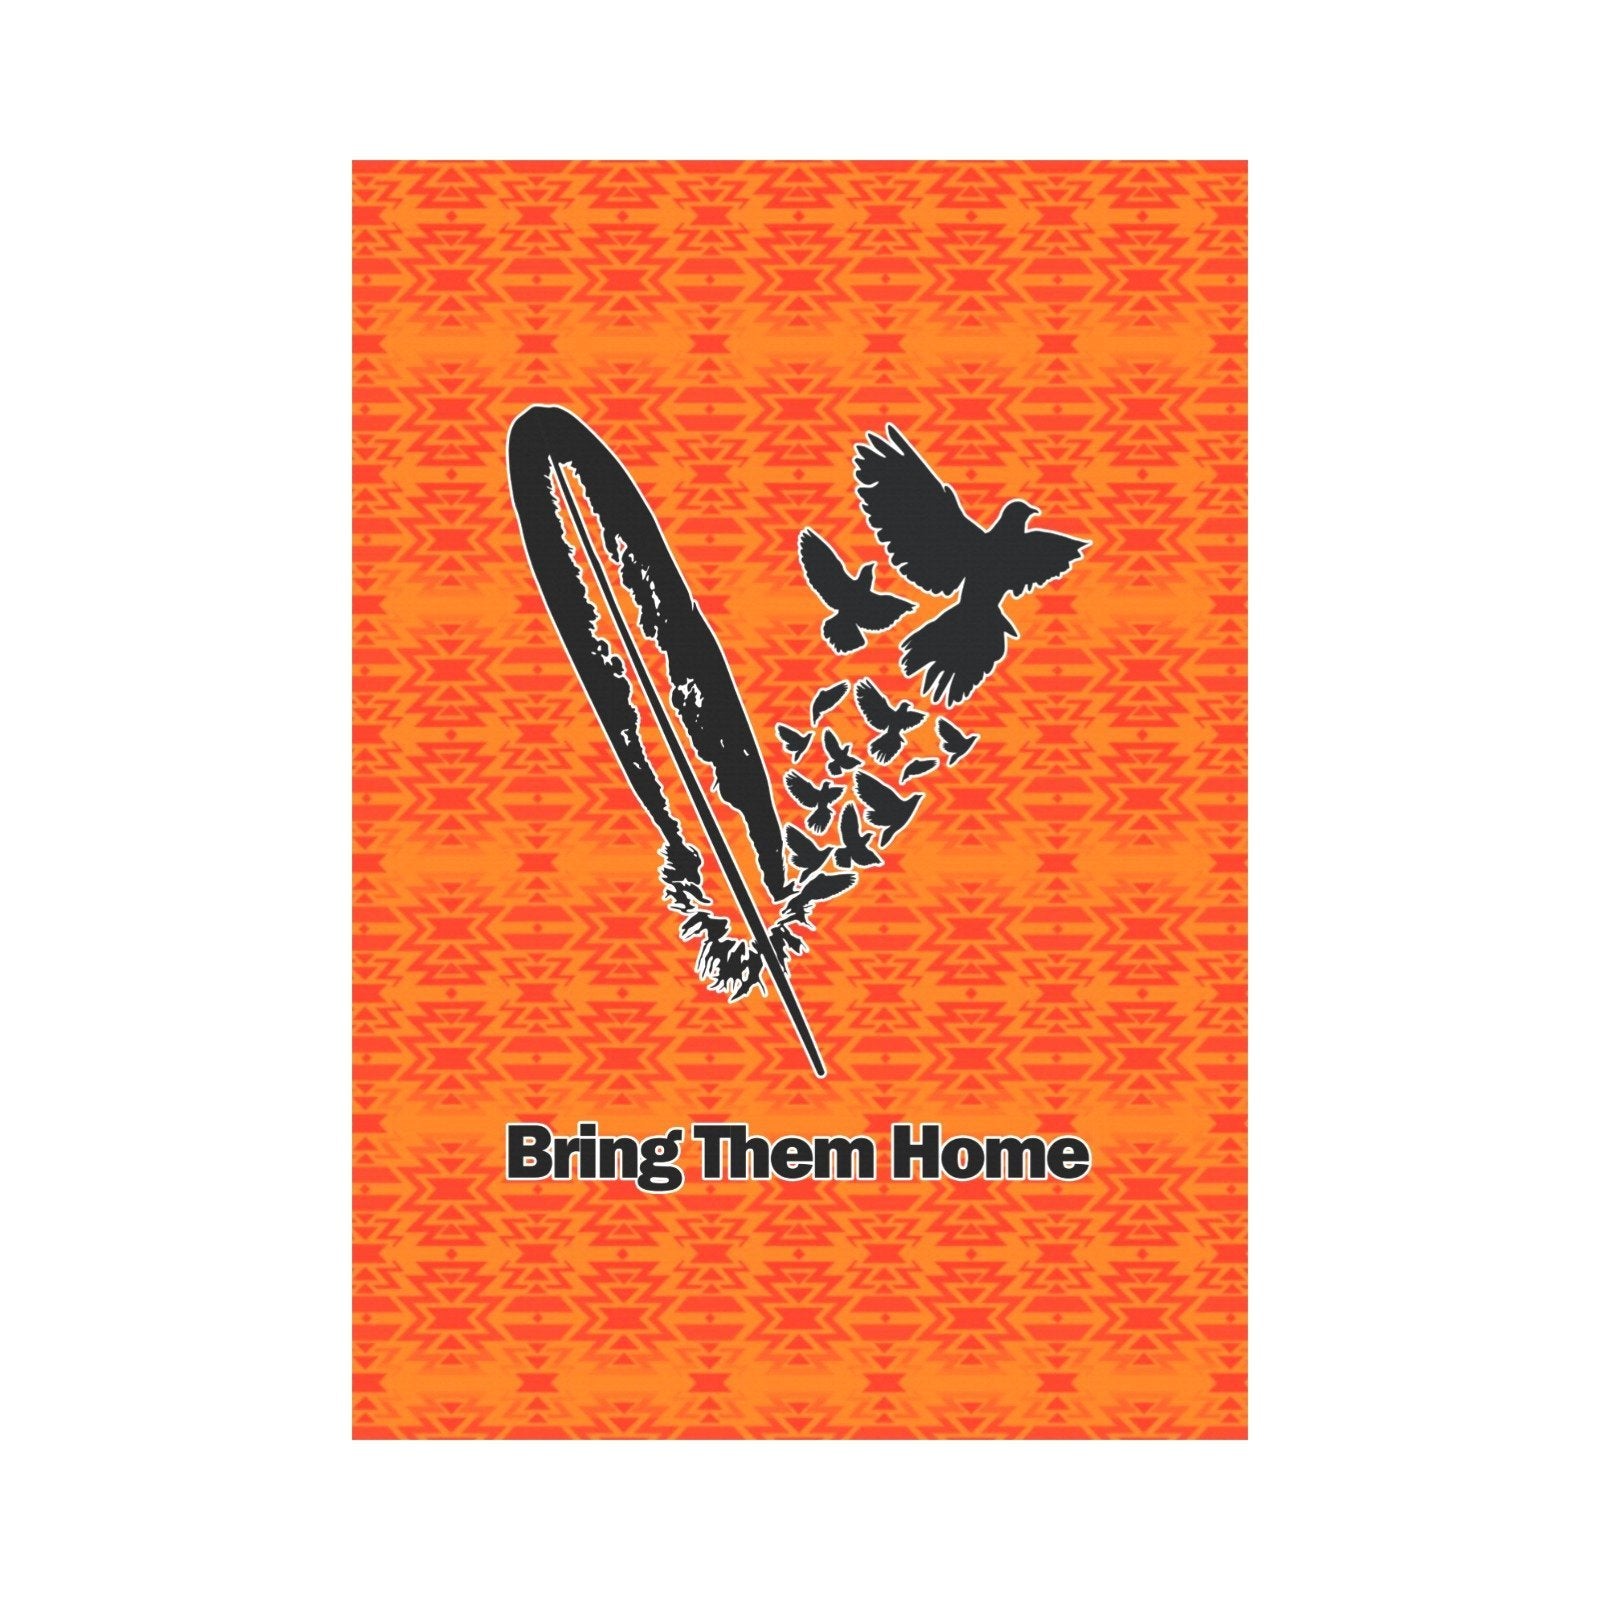 Fire Colors and Turquoise Orange - Bring Them Home Garden Flag 28''x40'' (Two Sides Printing) Garden Flag 28‘’x40‘’ (Two Sides) e-joyer 